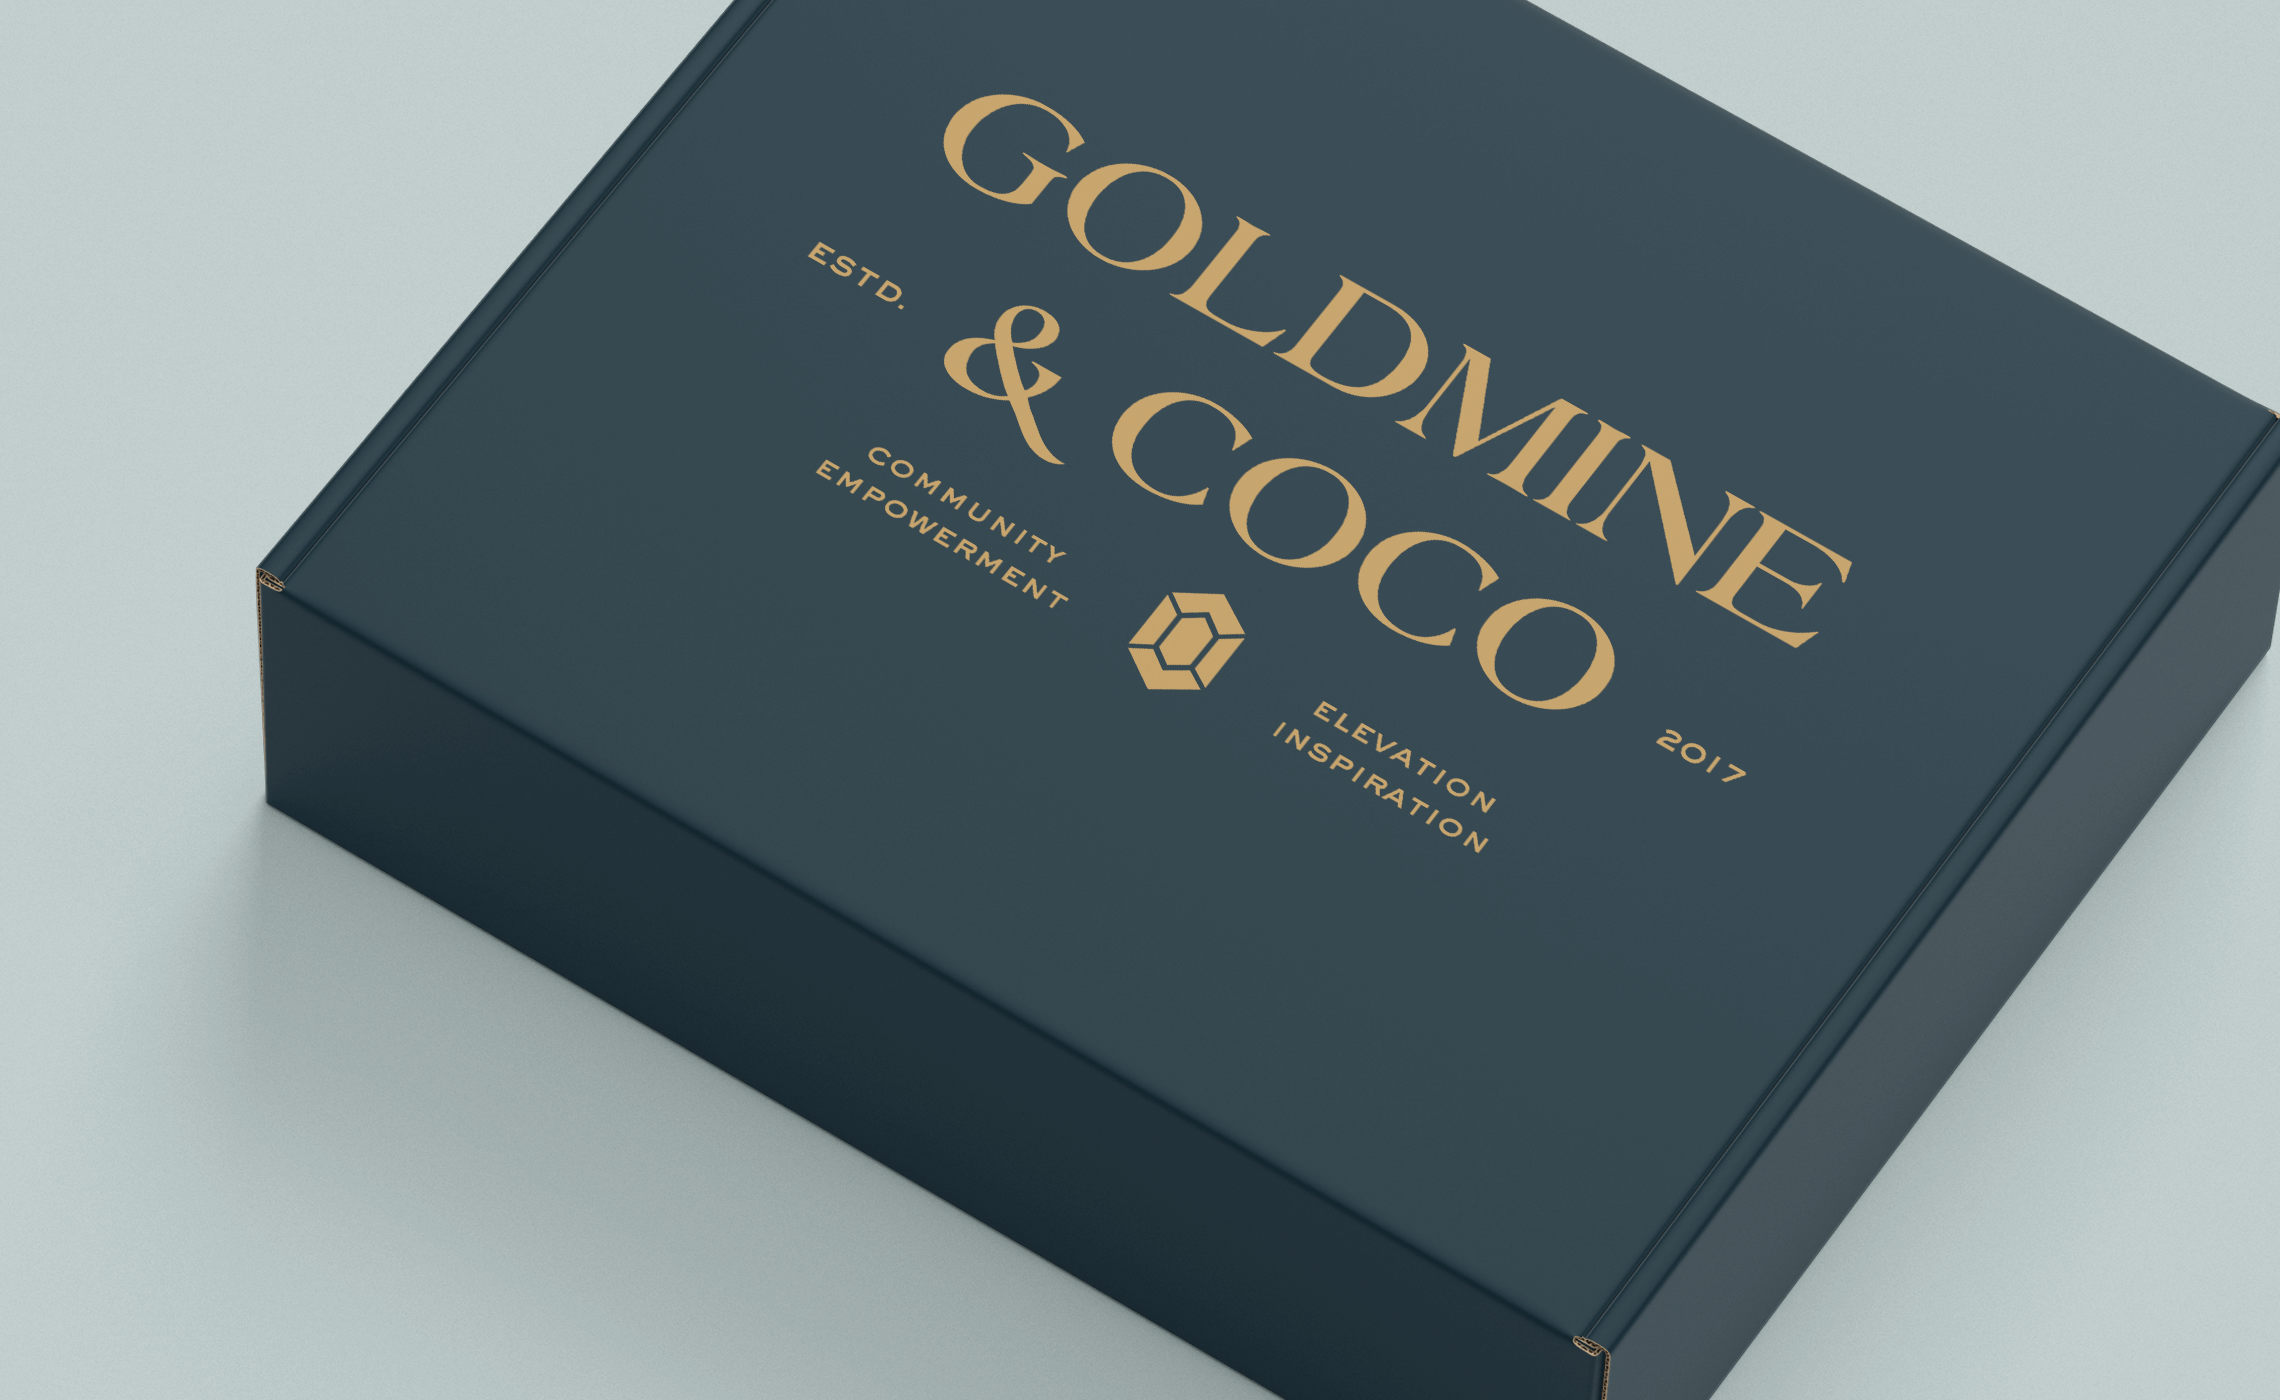 Brand strategy and design for an online stationery and lifestyle company